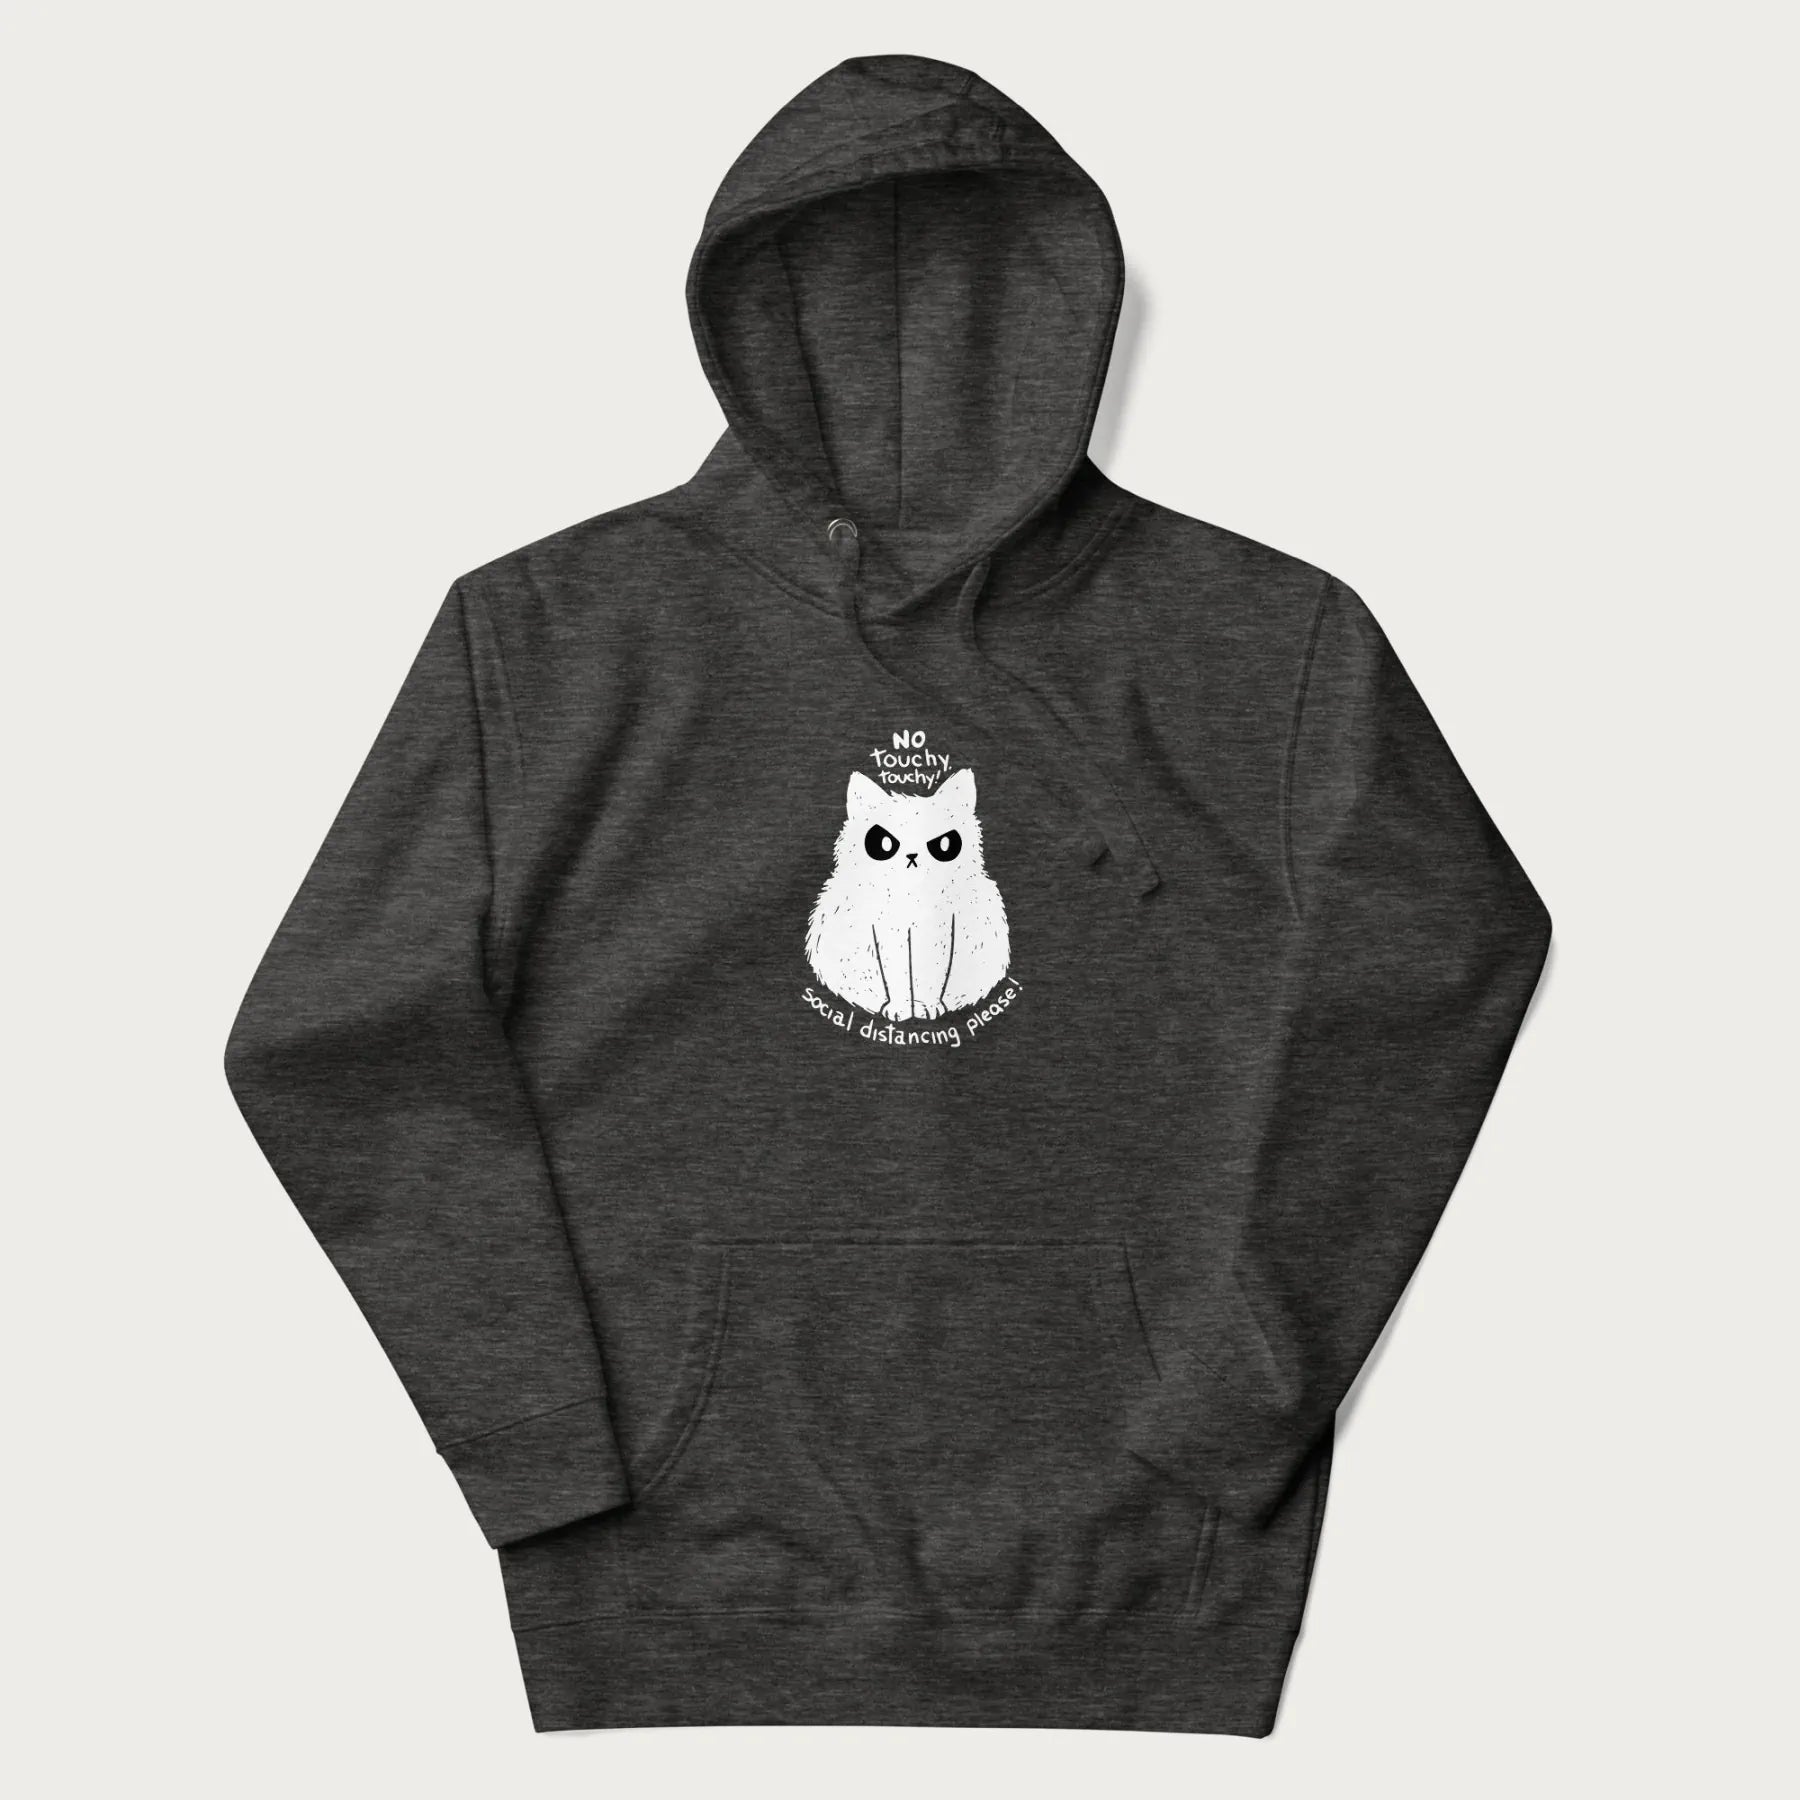 Dark grey hoodie with a 'No Touchy, Touchy! Social Distancing Please!' white cat graphic design.